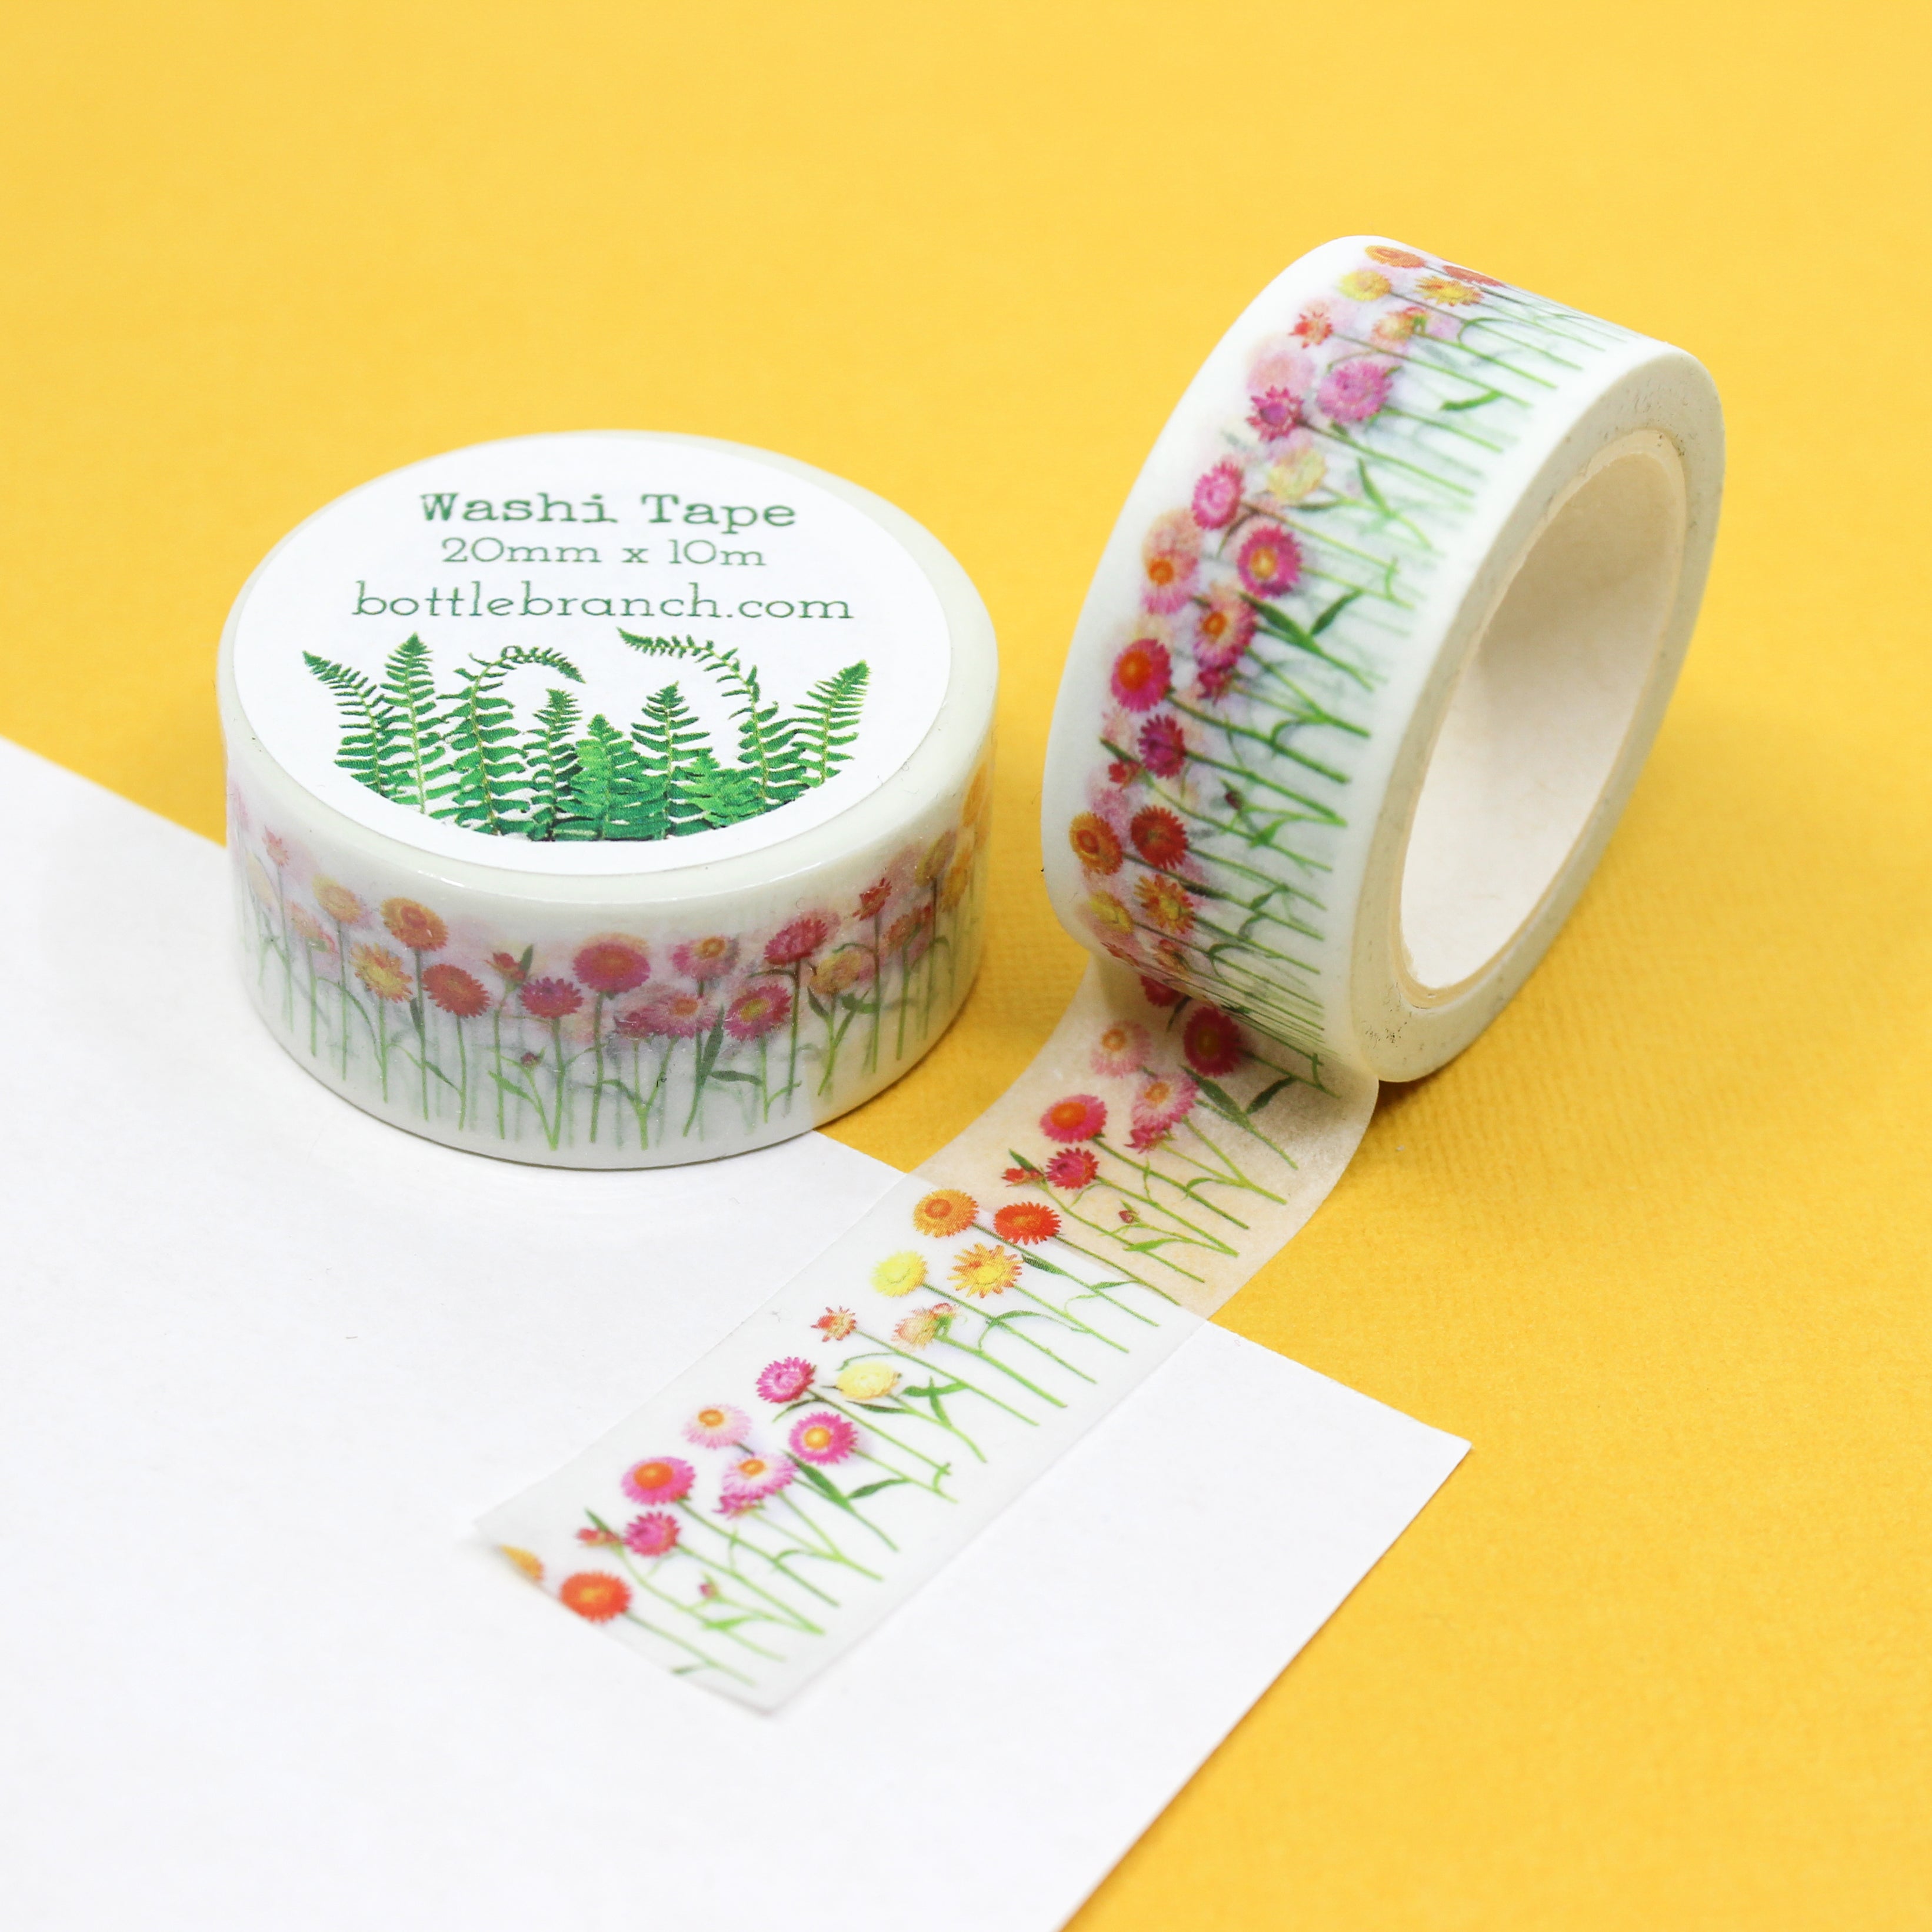 Elevate your crafts with our exquisite pink strawflower washi tape, adorned with intricate floral designs that exude grace and beauty. Add a touch of delicate elegance with our pink strawflower washi tape, featuring charming floral patterns in shades of pink, orange, and yellow. This tape is designed by bottle branch and sold at BBB Supplies Craft Shop.